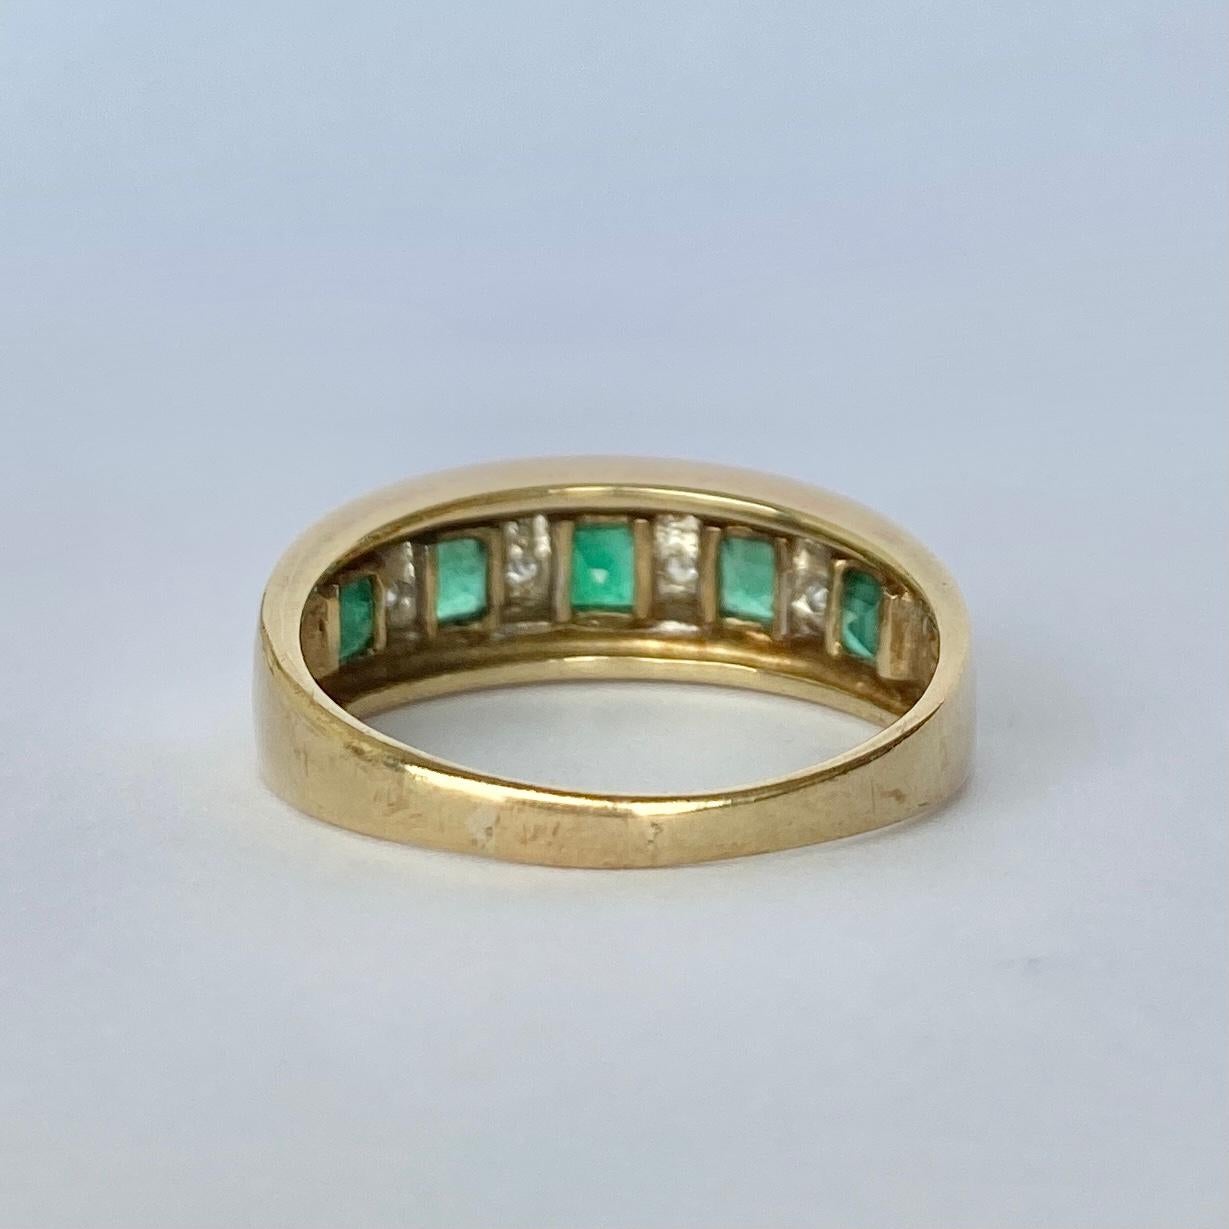 The square cut emeralds in this ring are beautiful and bright and measure 15pts each. In between the gorgeous green stones are diamonds which measure 2pts each. The ring is modelled in 9carat gold.

Ring Size: S 1/2 or 9 1/4 
Band Width: